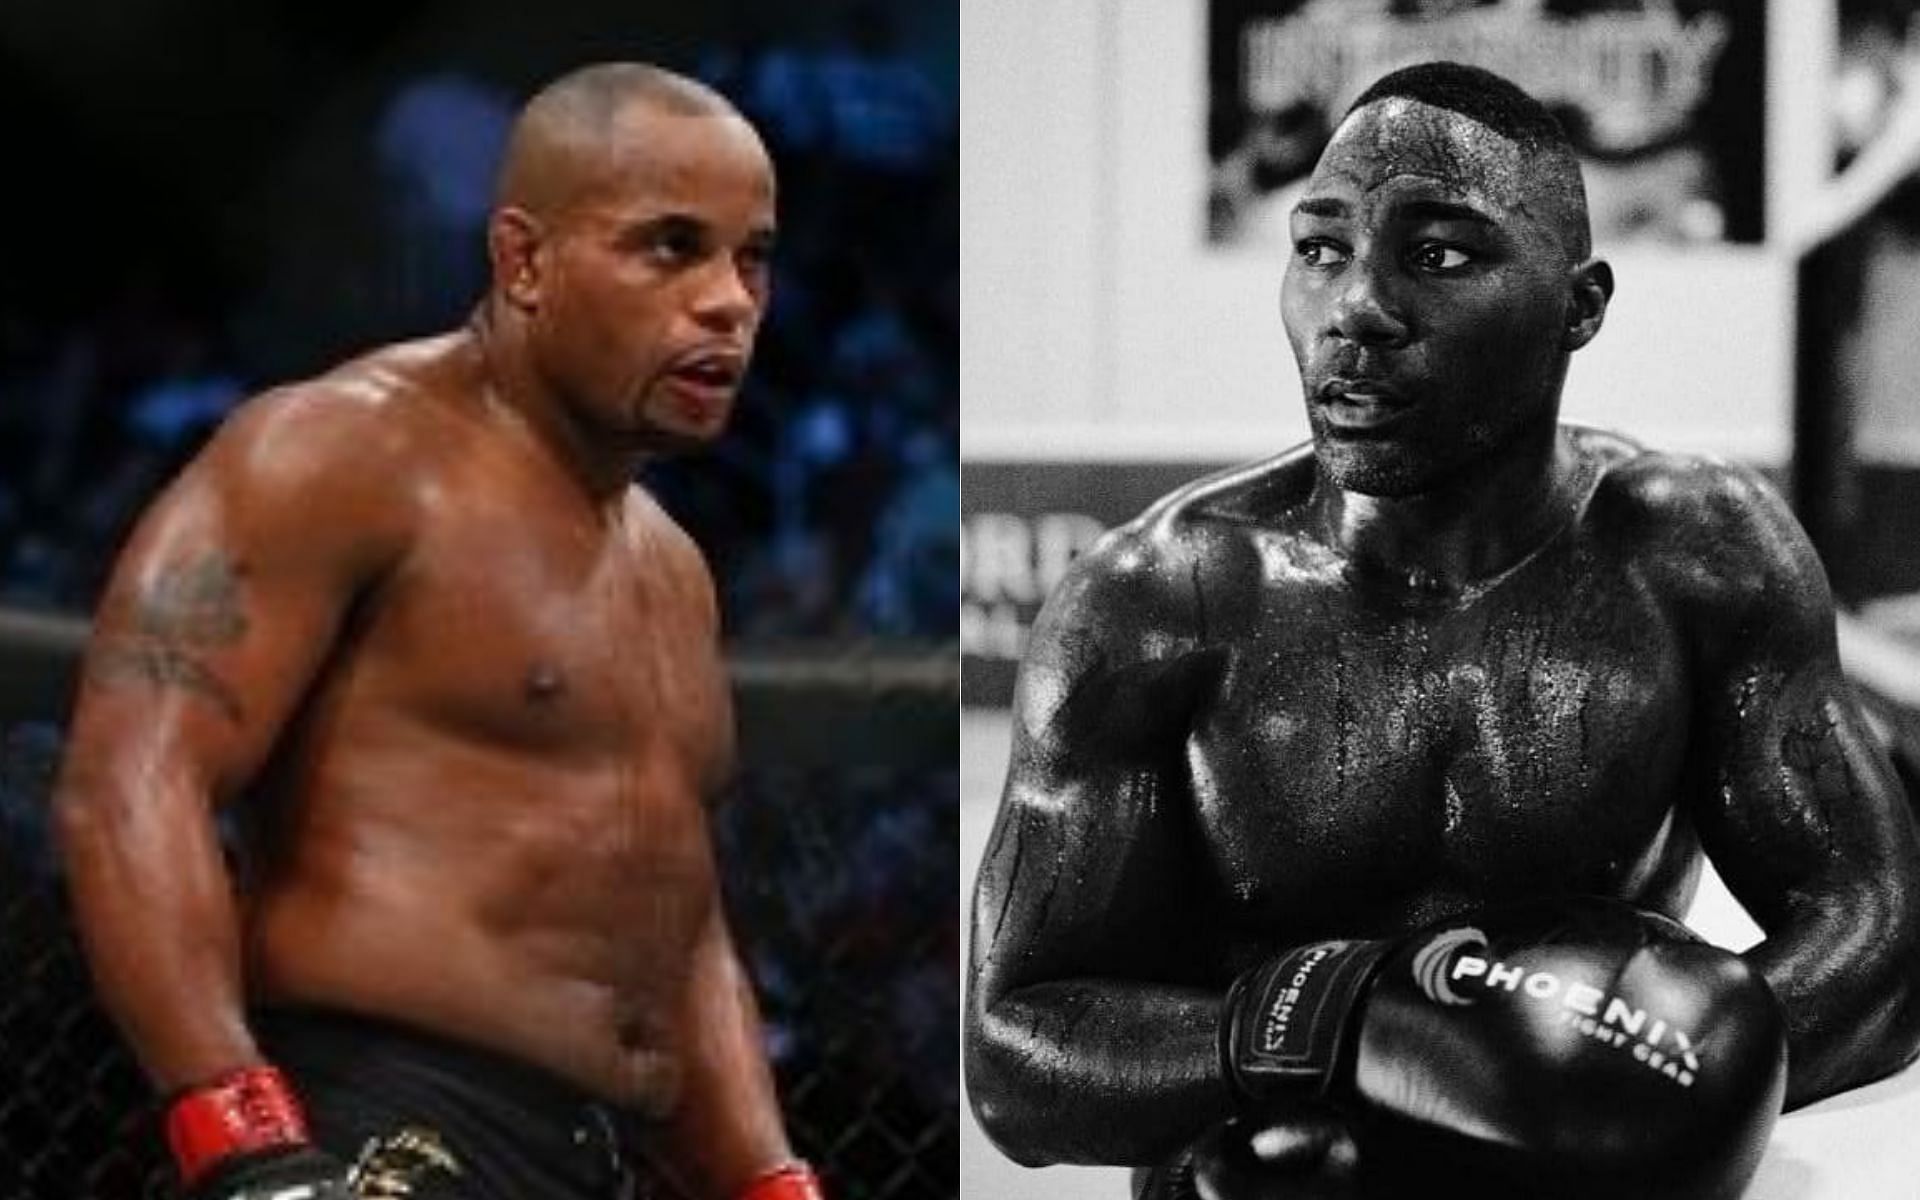 Daniel Cormier (left) and Anthony Johnson (right) [Image credits: @dc_mma and @anthony_rumble on Instagram]